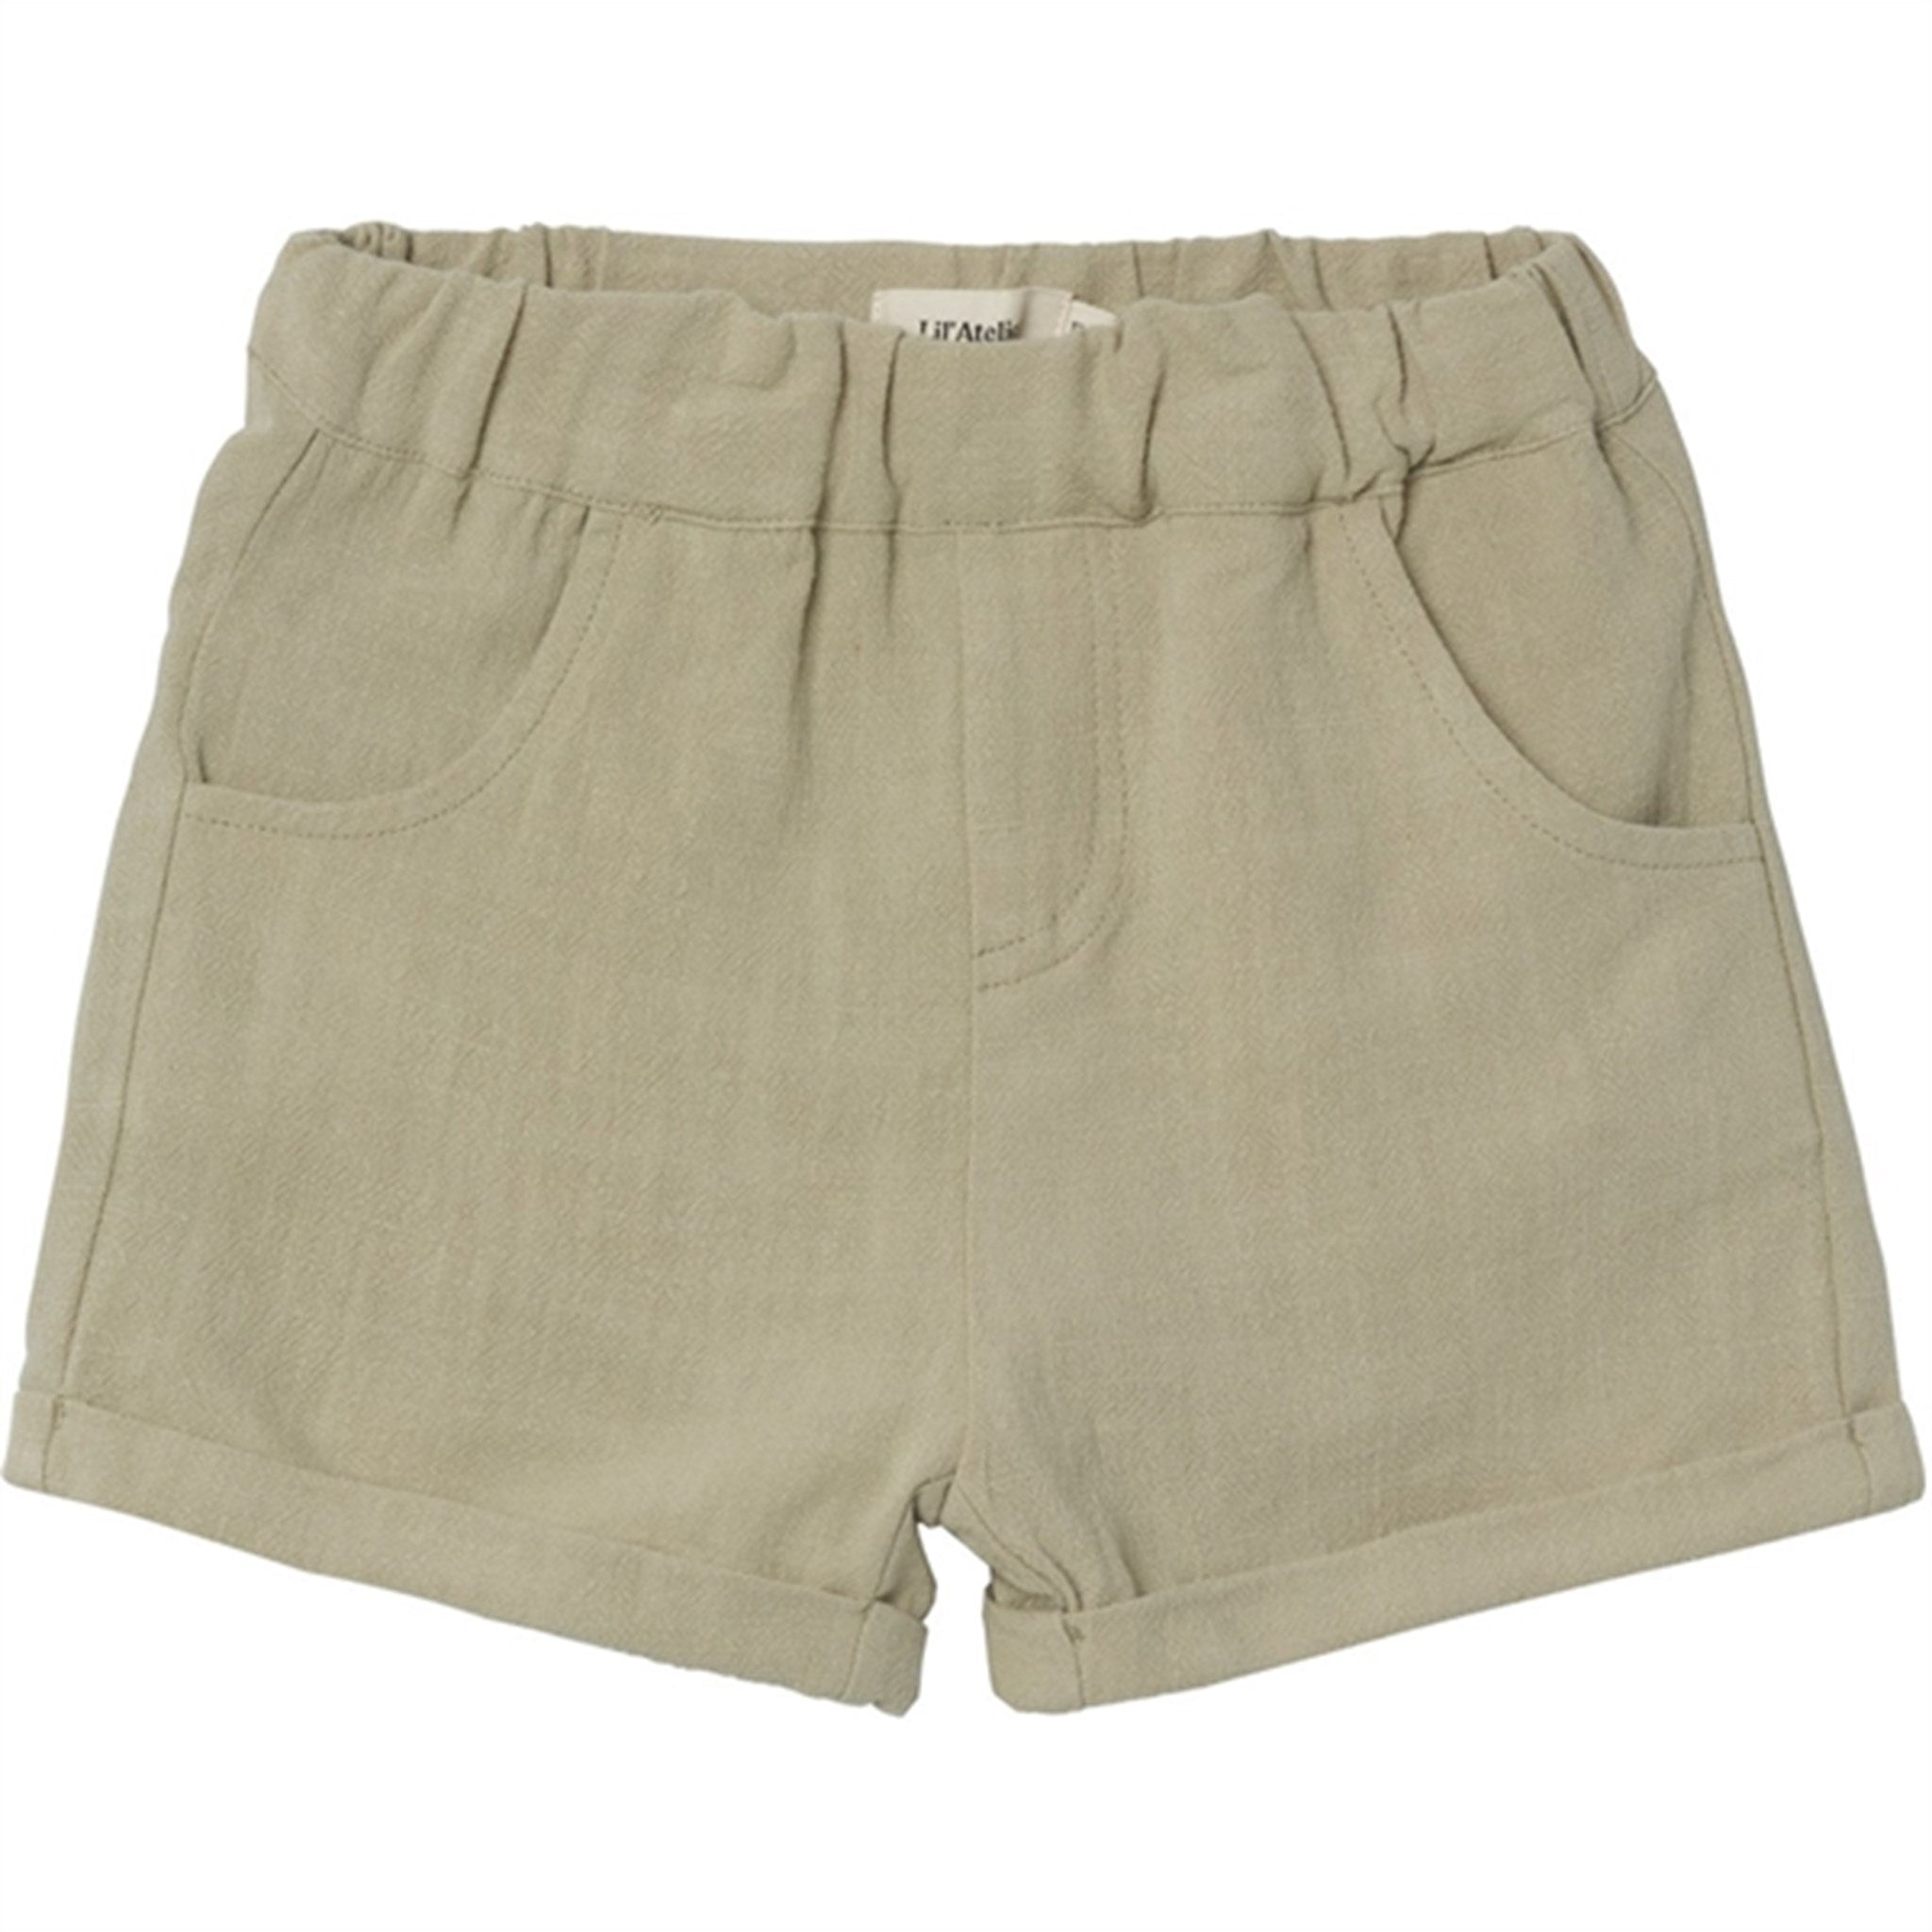 Lil'Atelier Moss Gray Dolie Fin Shorts